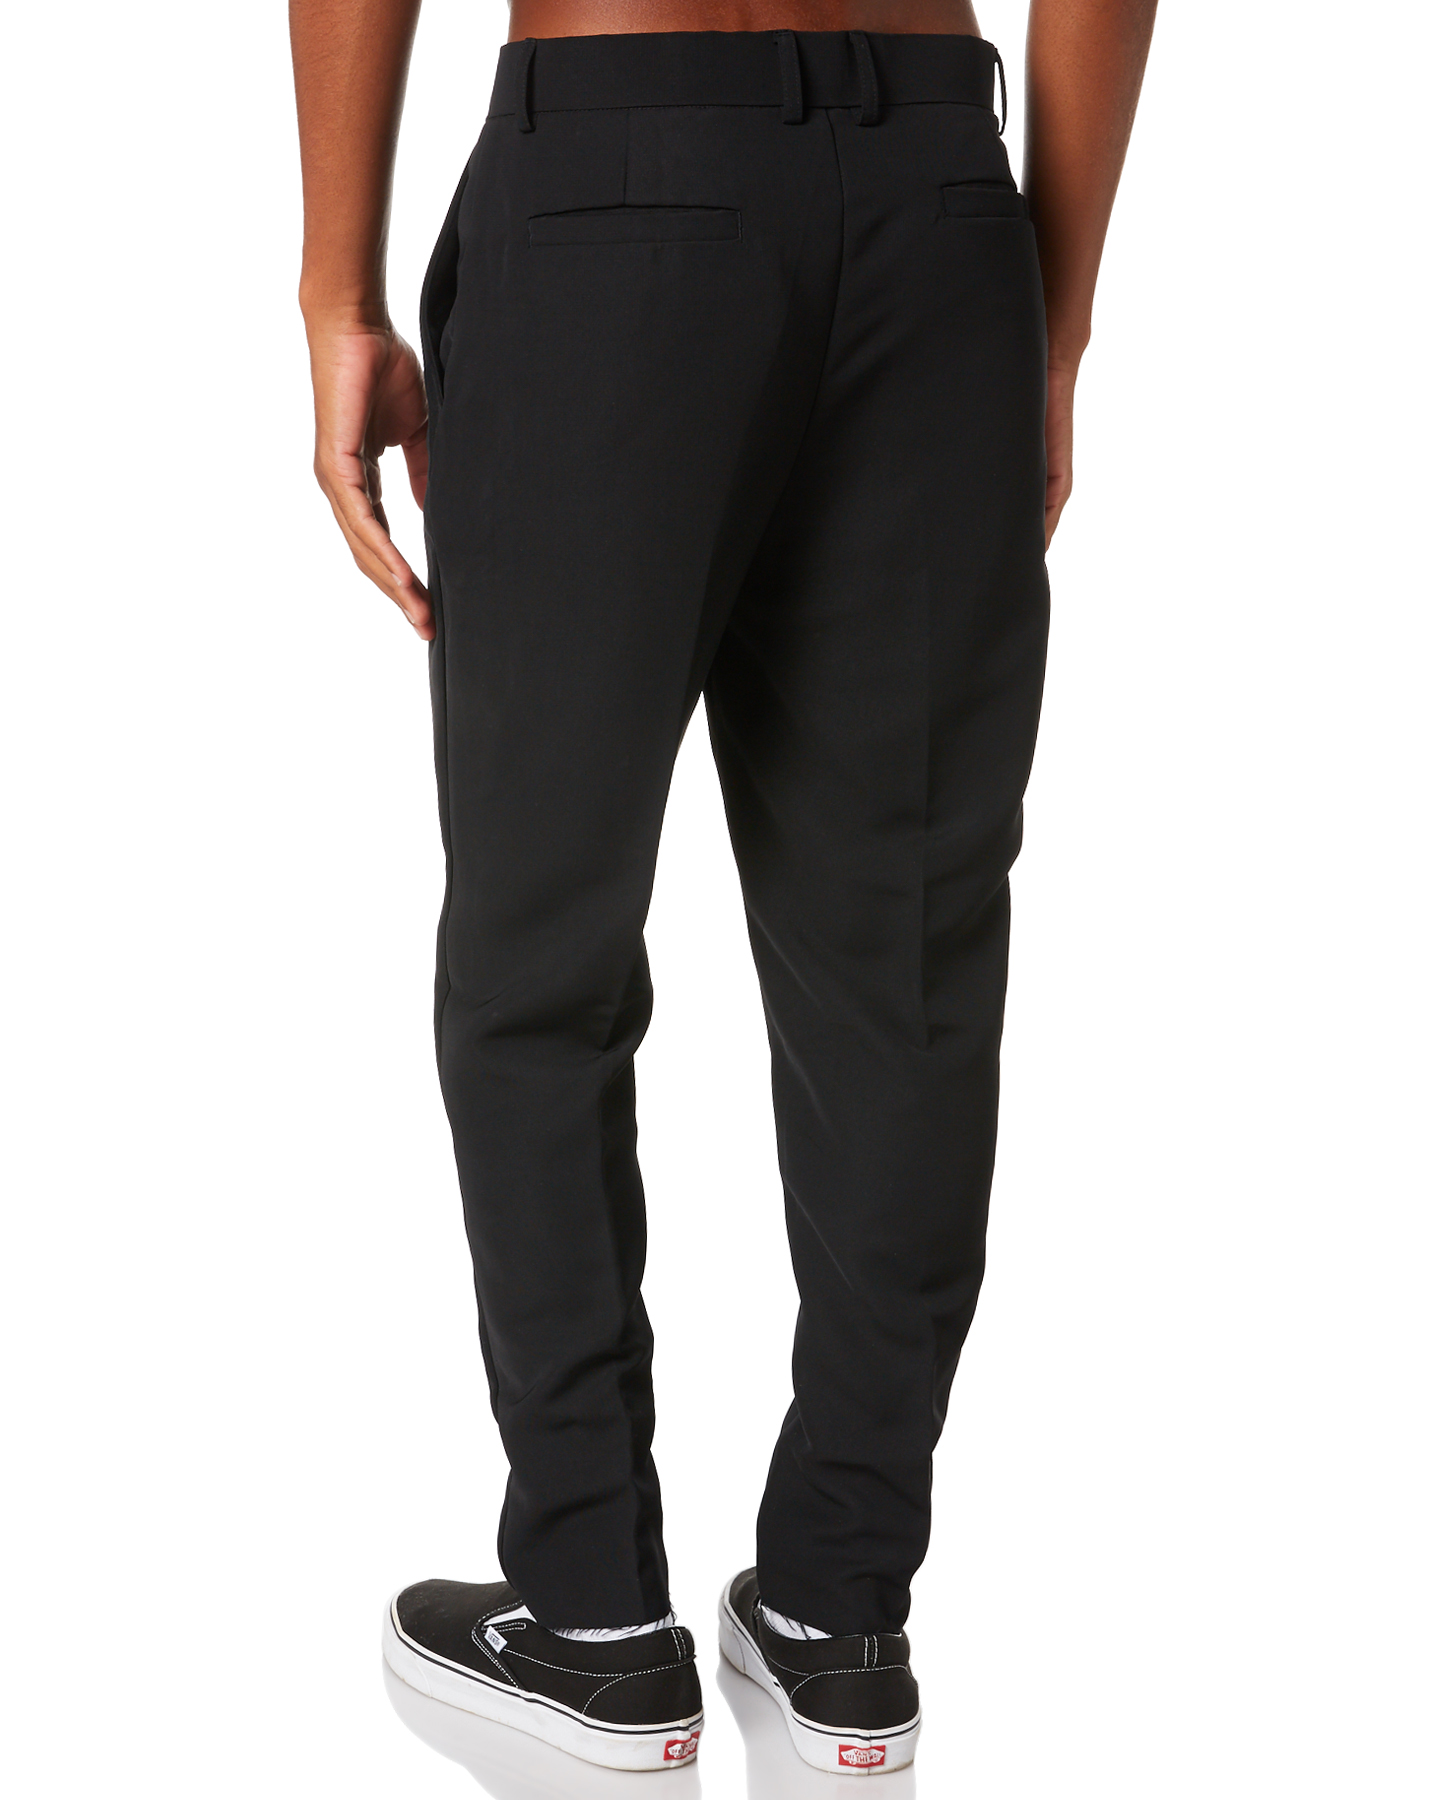 The People Vs Viscious Mens Pleated Pant - Black | SurfStitch